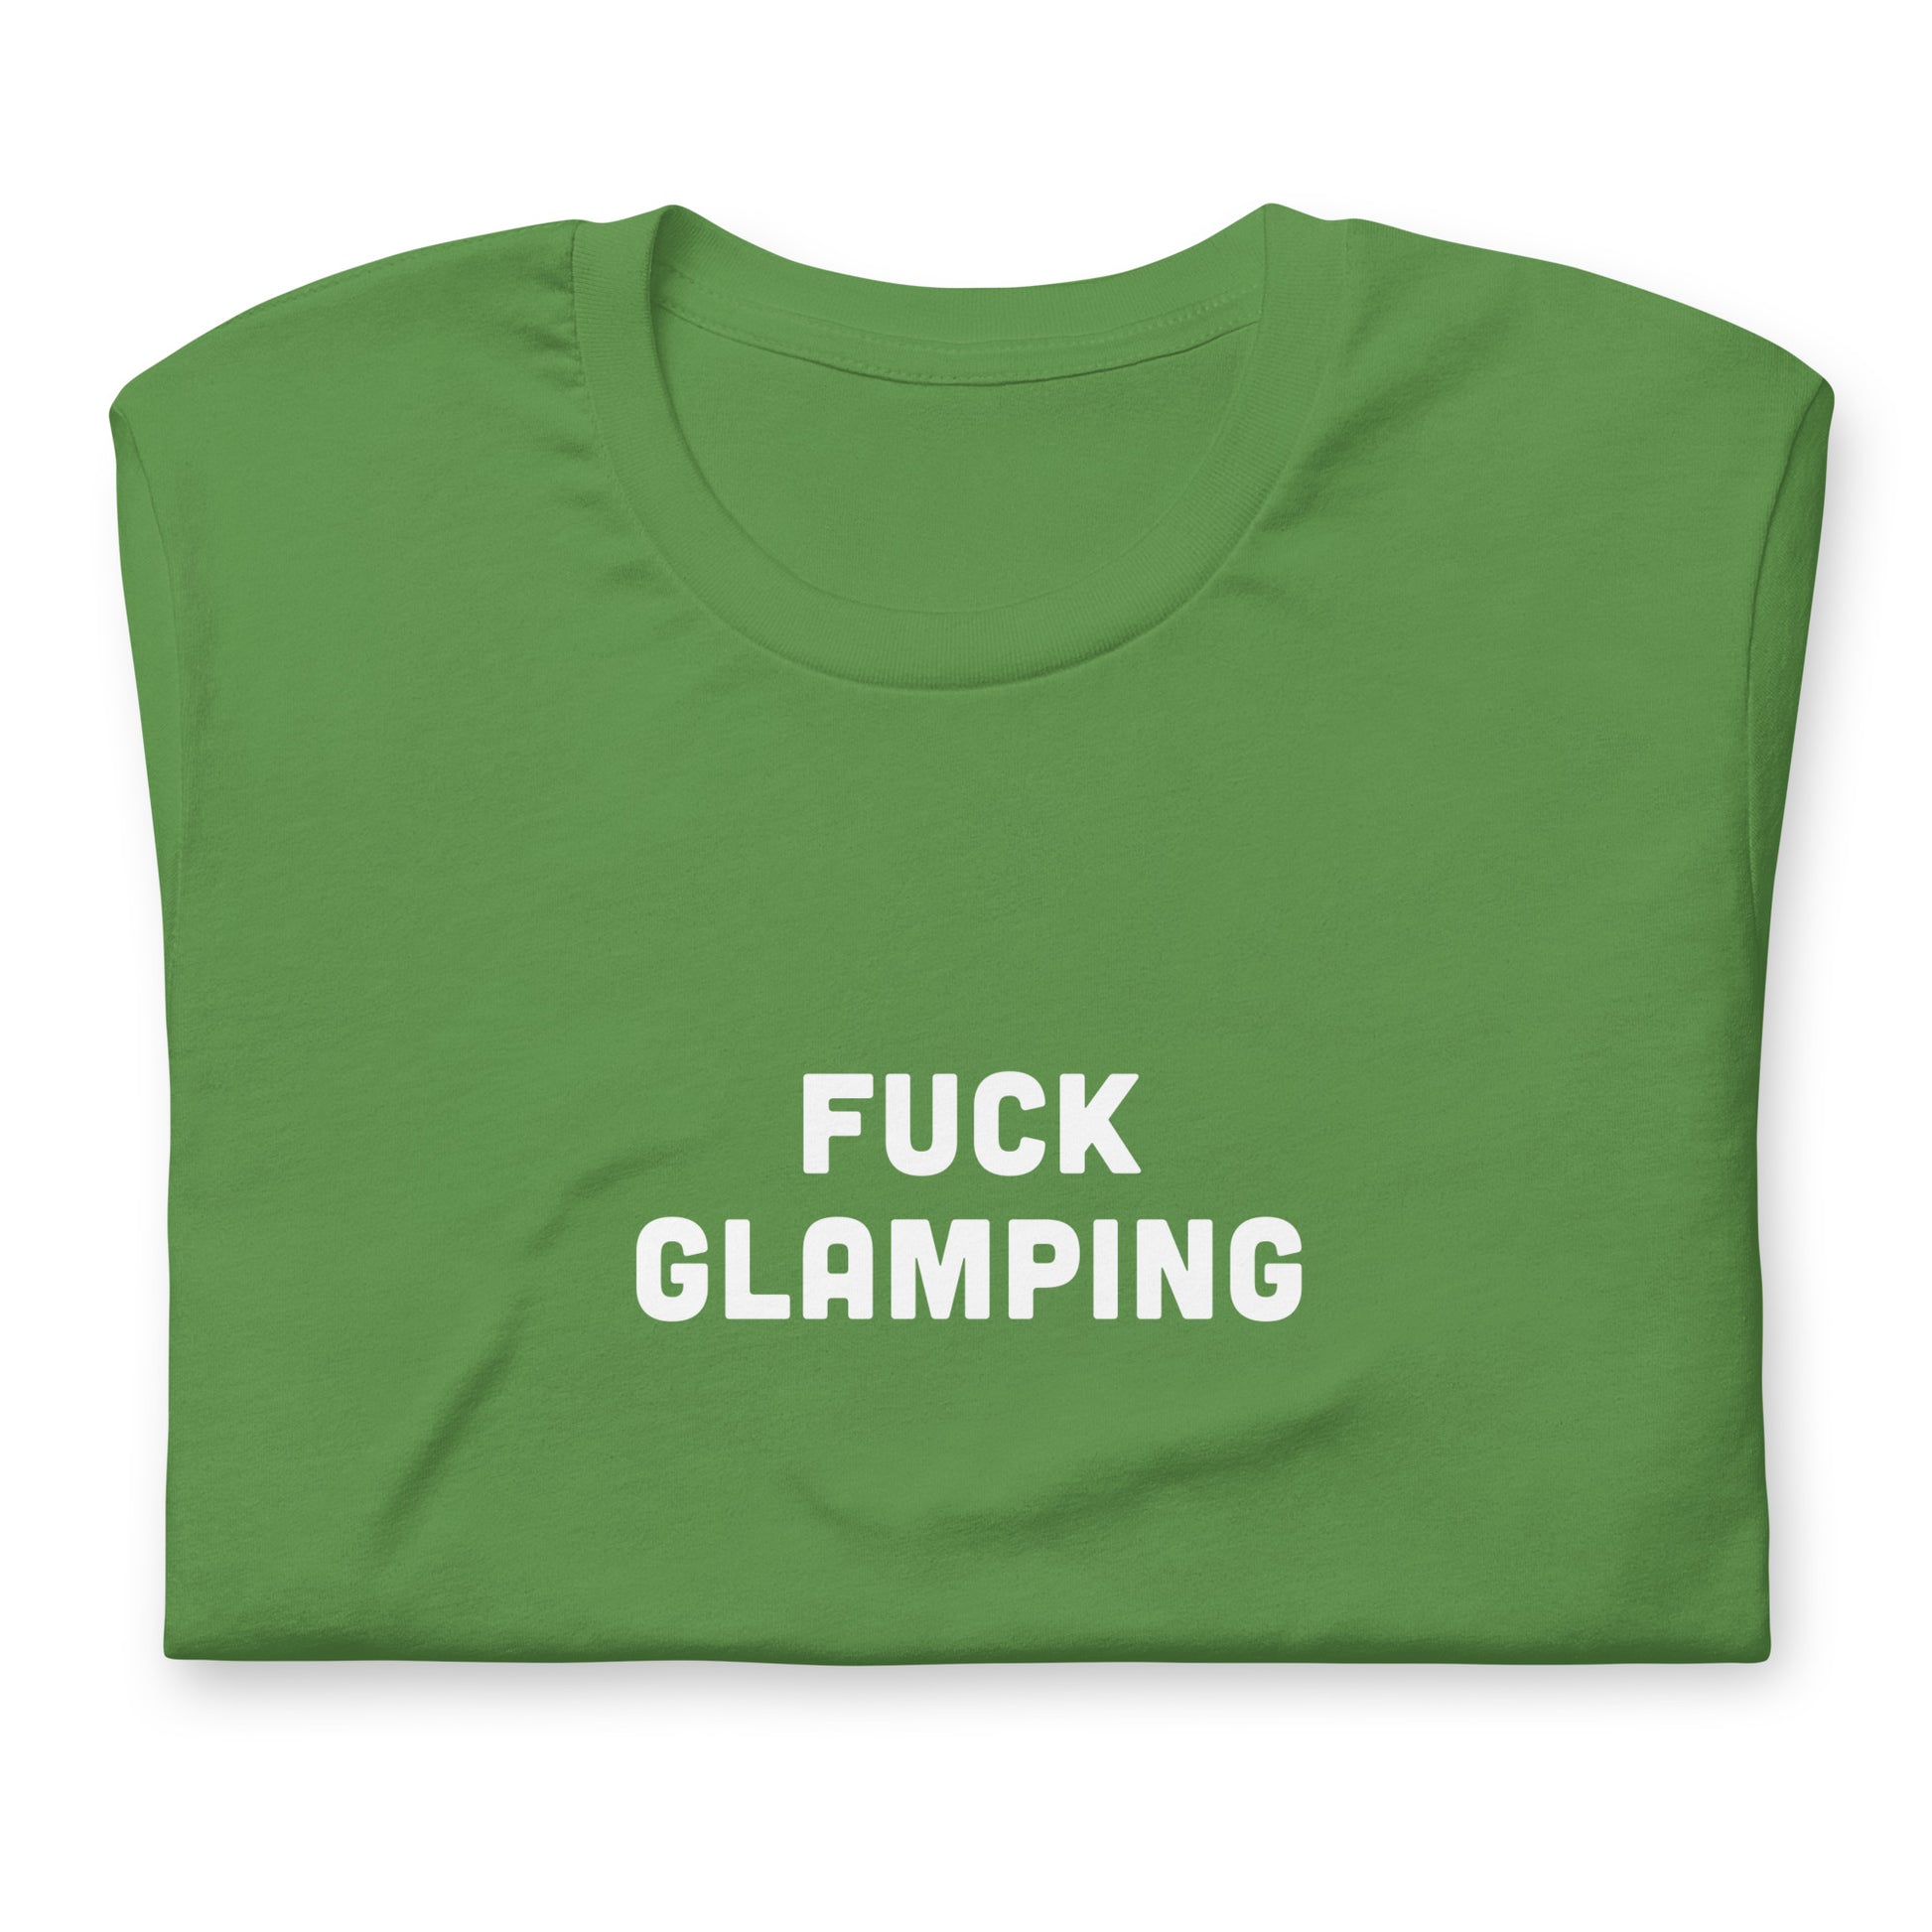 Fuck Glamping T-Shirt Size 2XL Color Navy